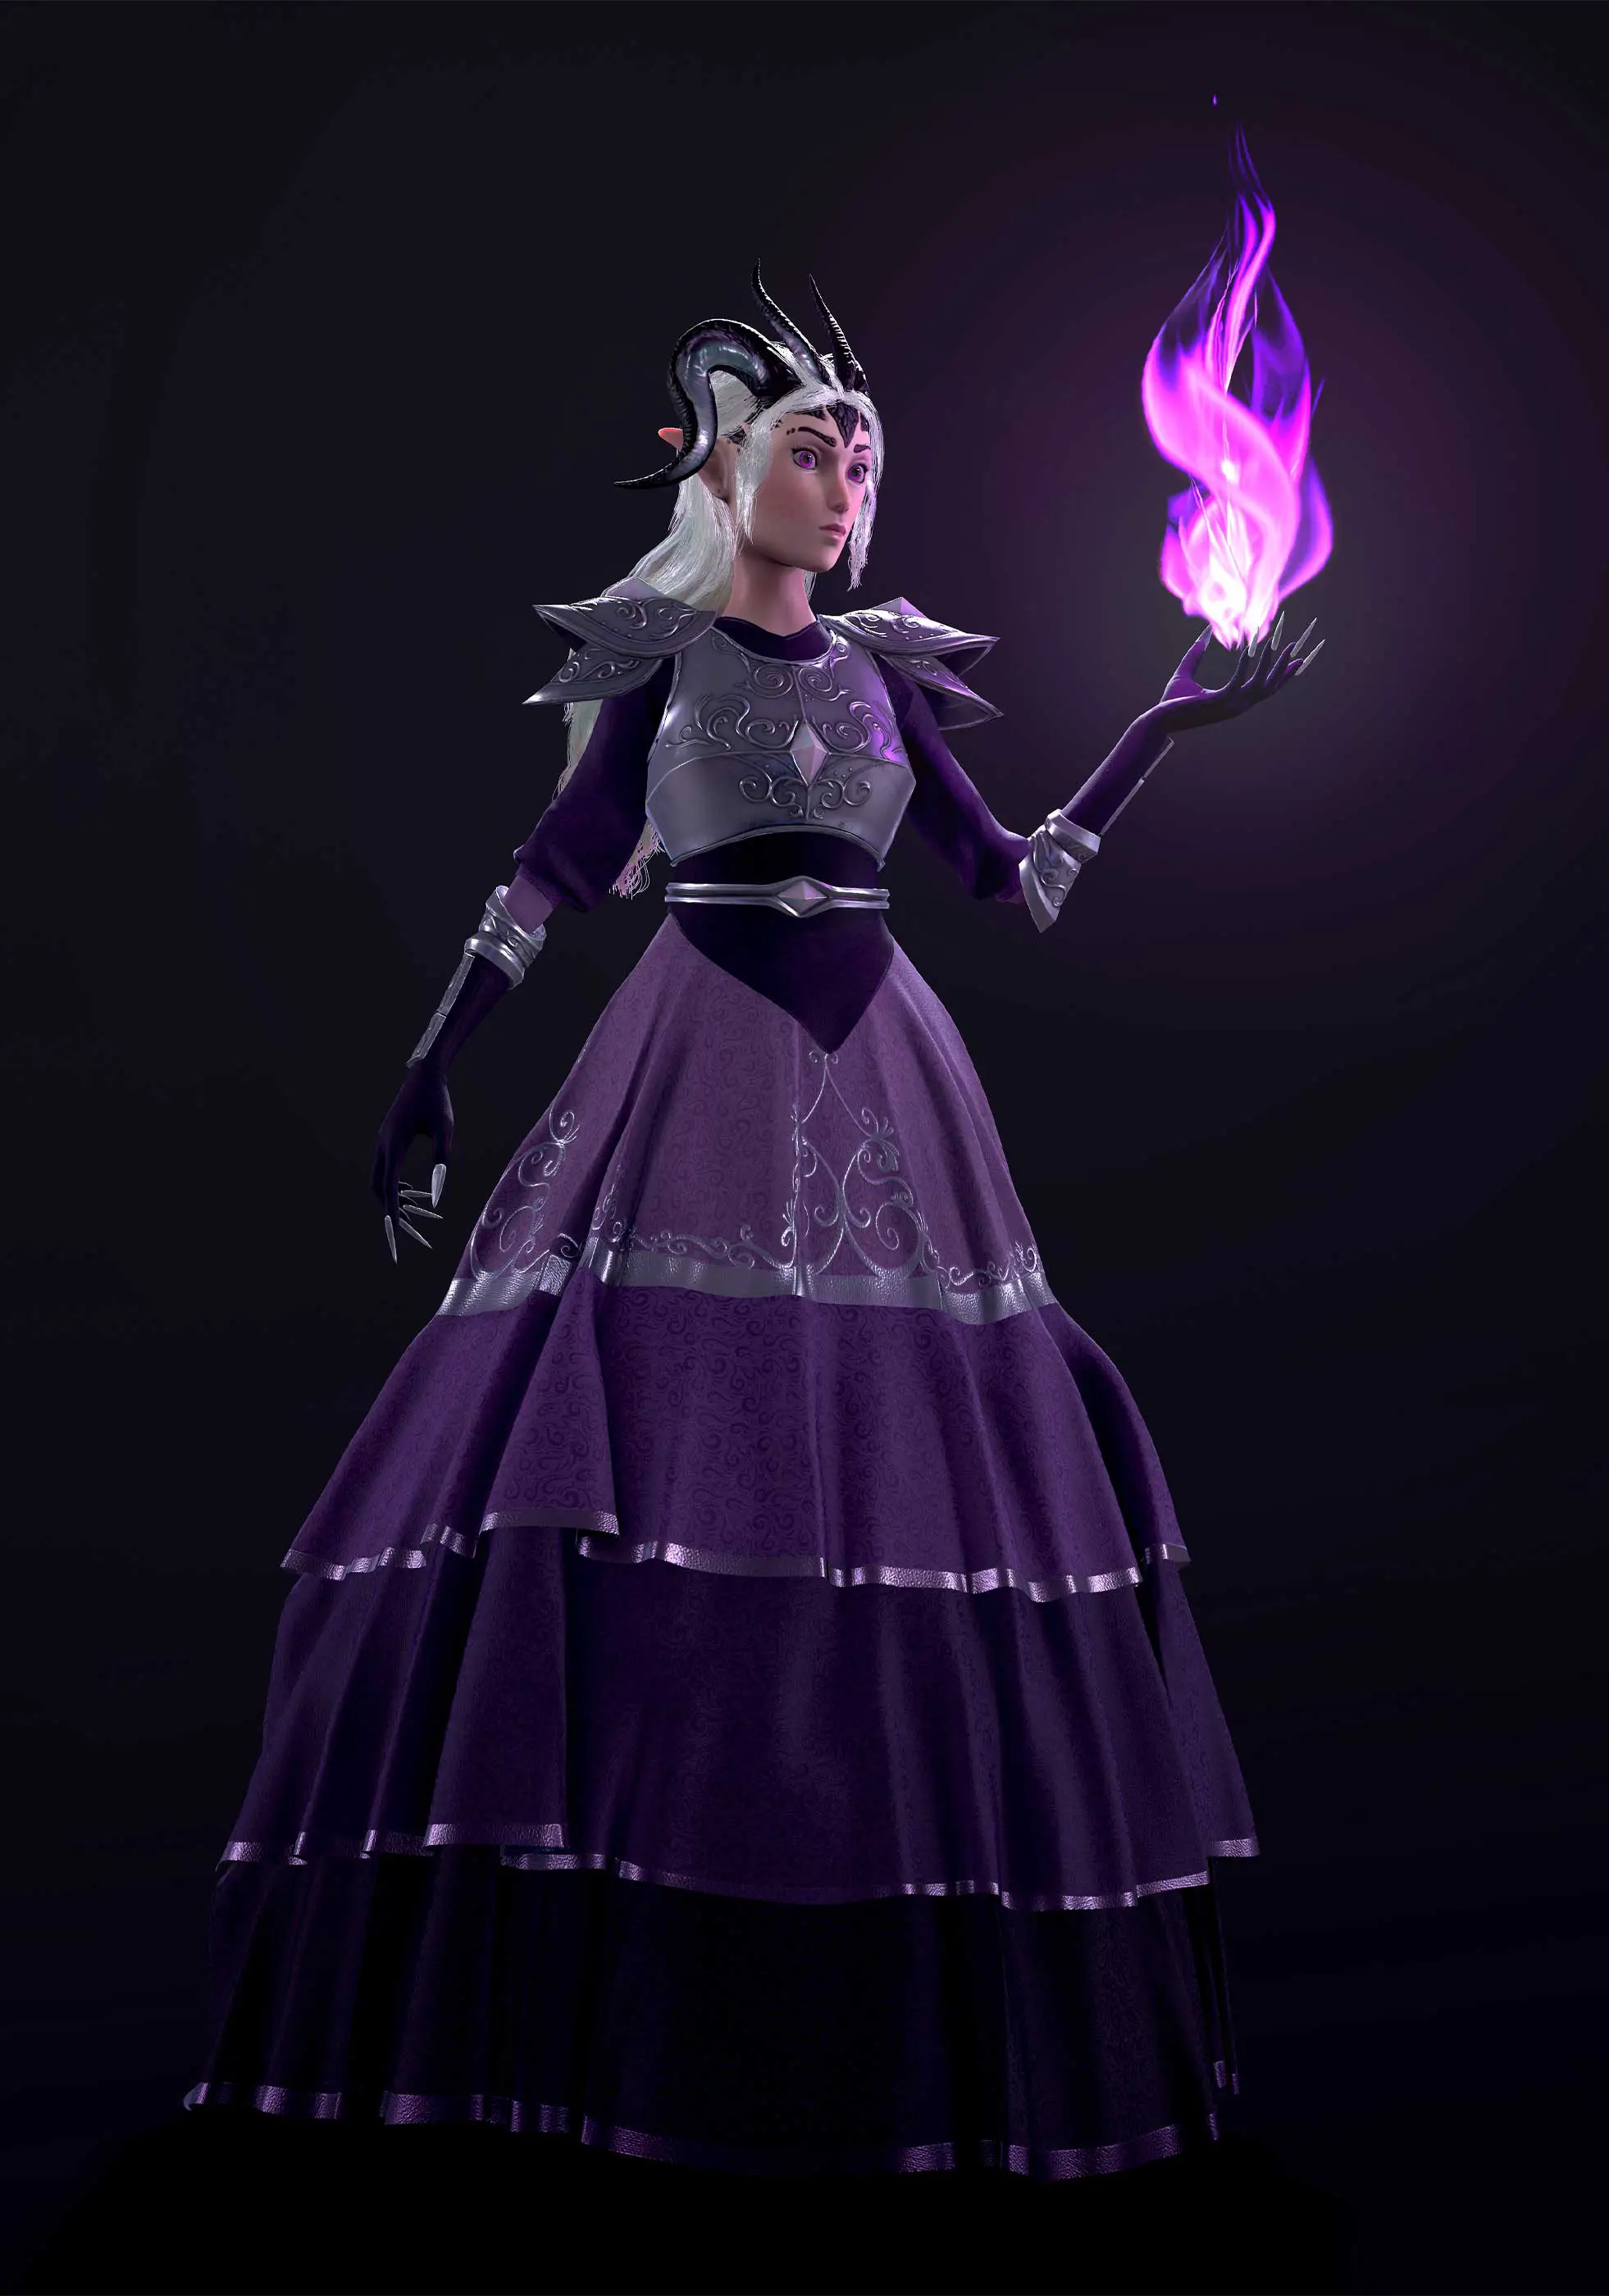 A 3D render of a woman with horns in armor casting purple fire.